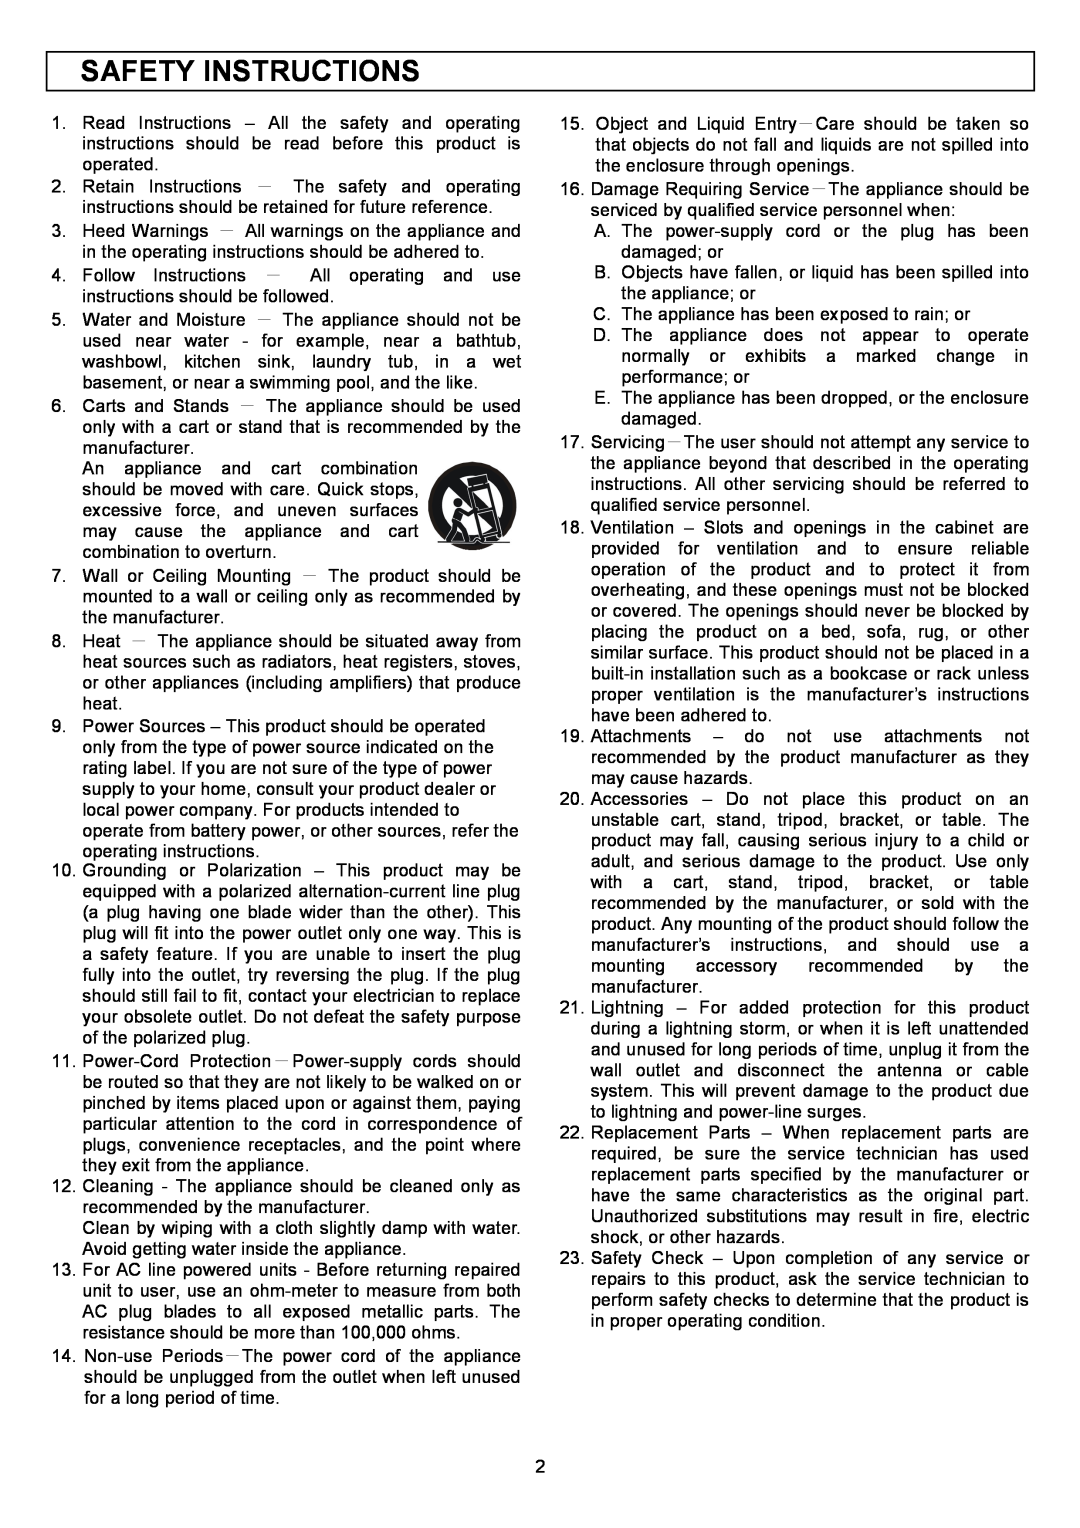 Stanton S.550 user manual Safety Instructions 